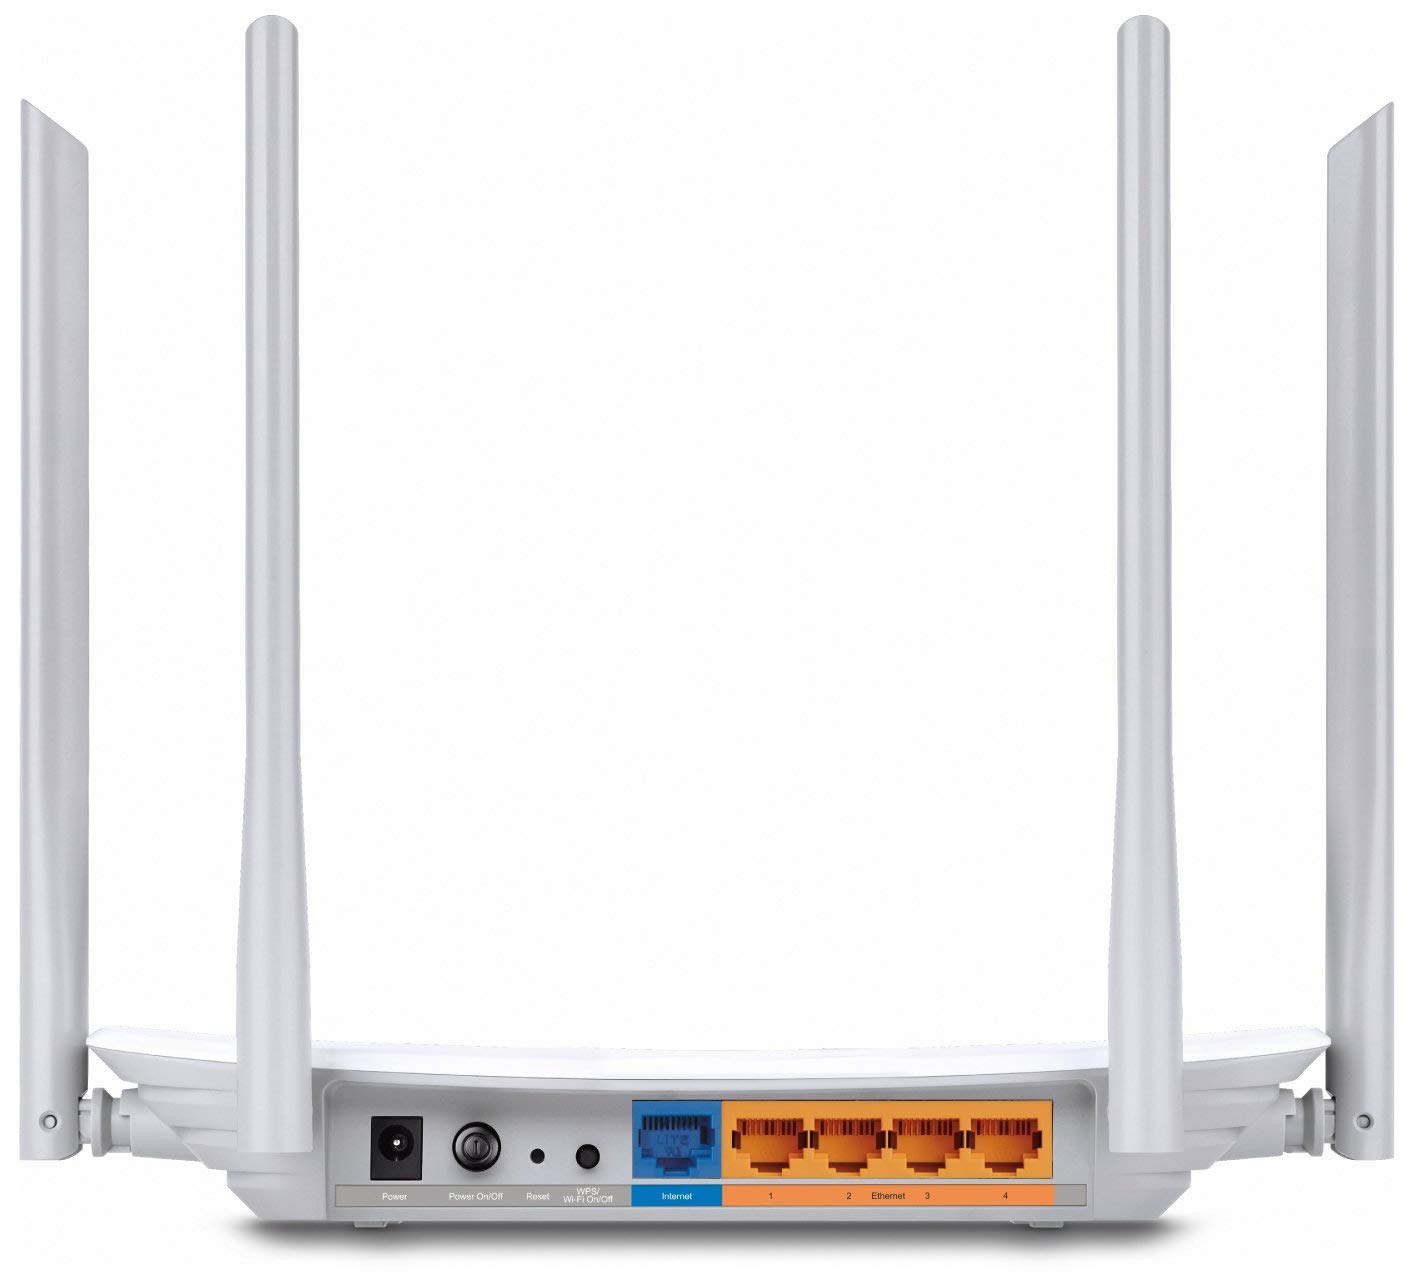 ROUTER TP-LINK ARCHER C50 AC1200 DUAL BAND WI-FI